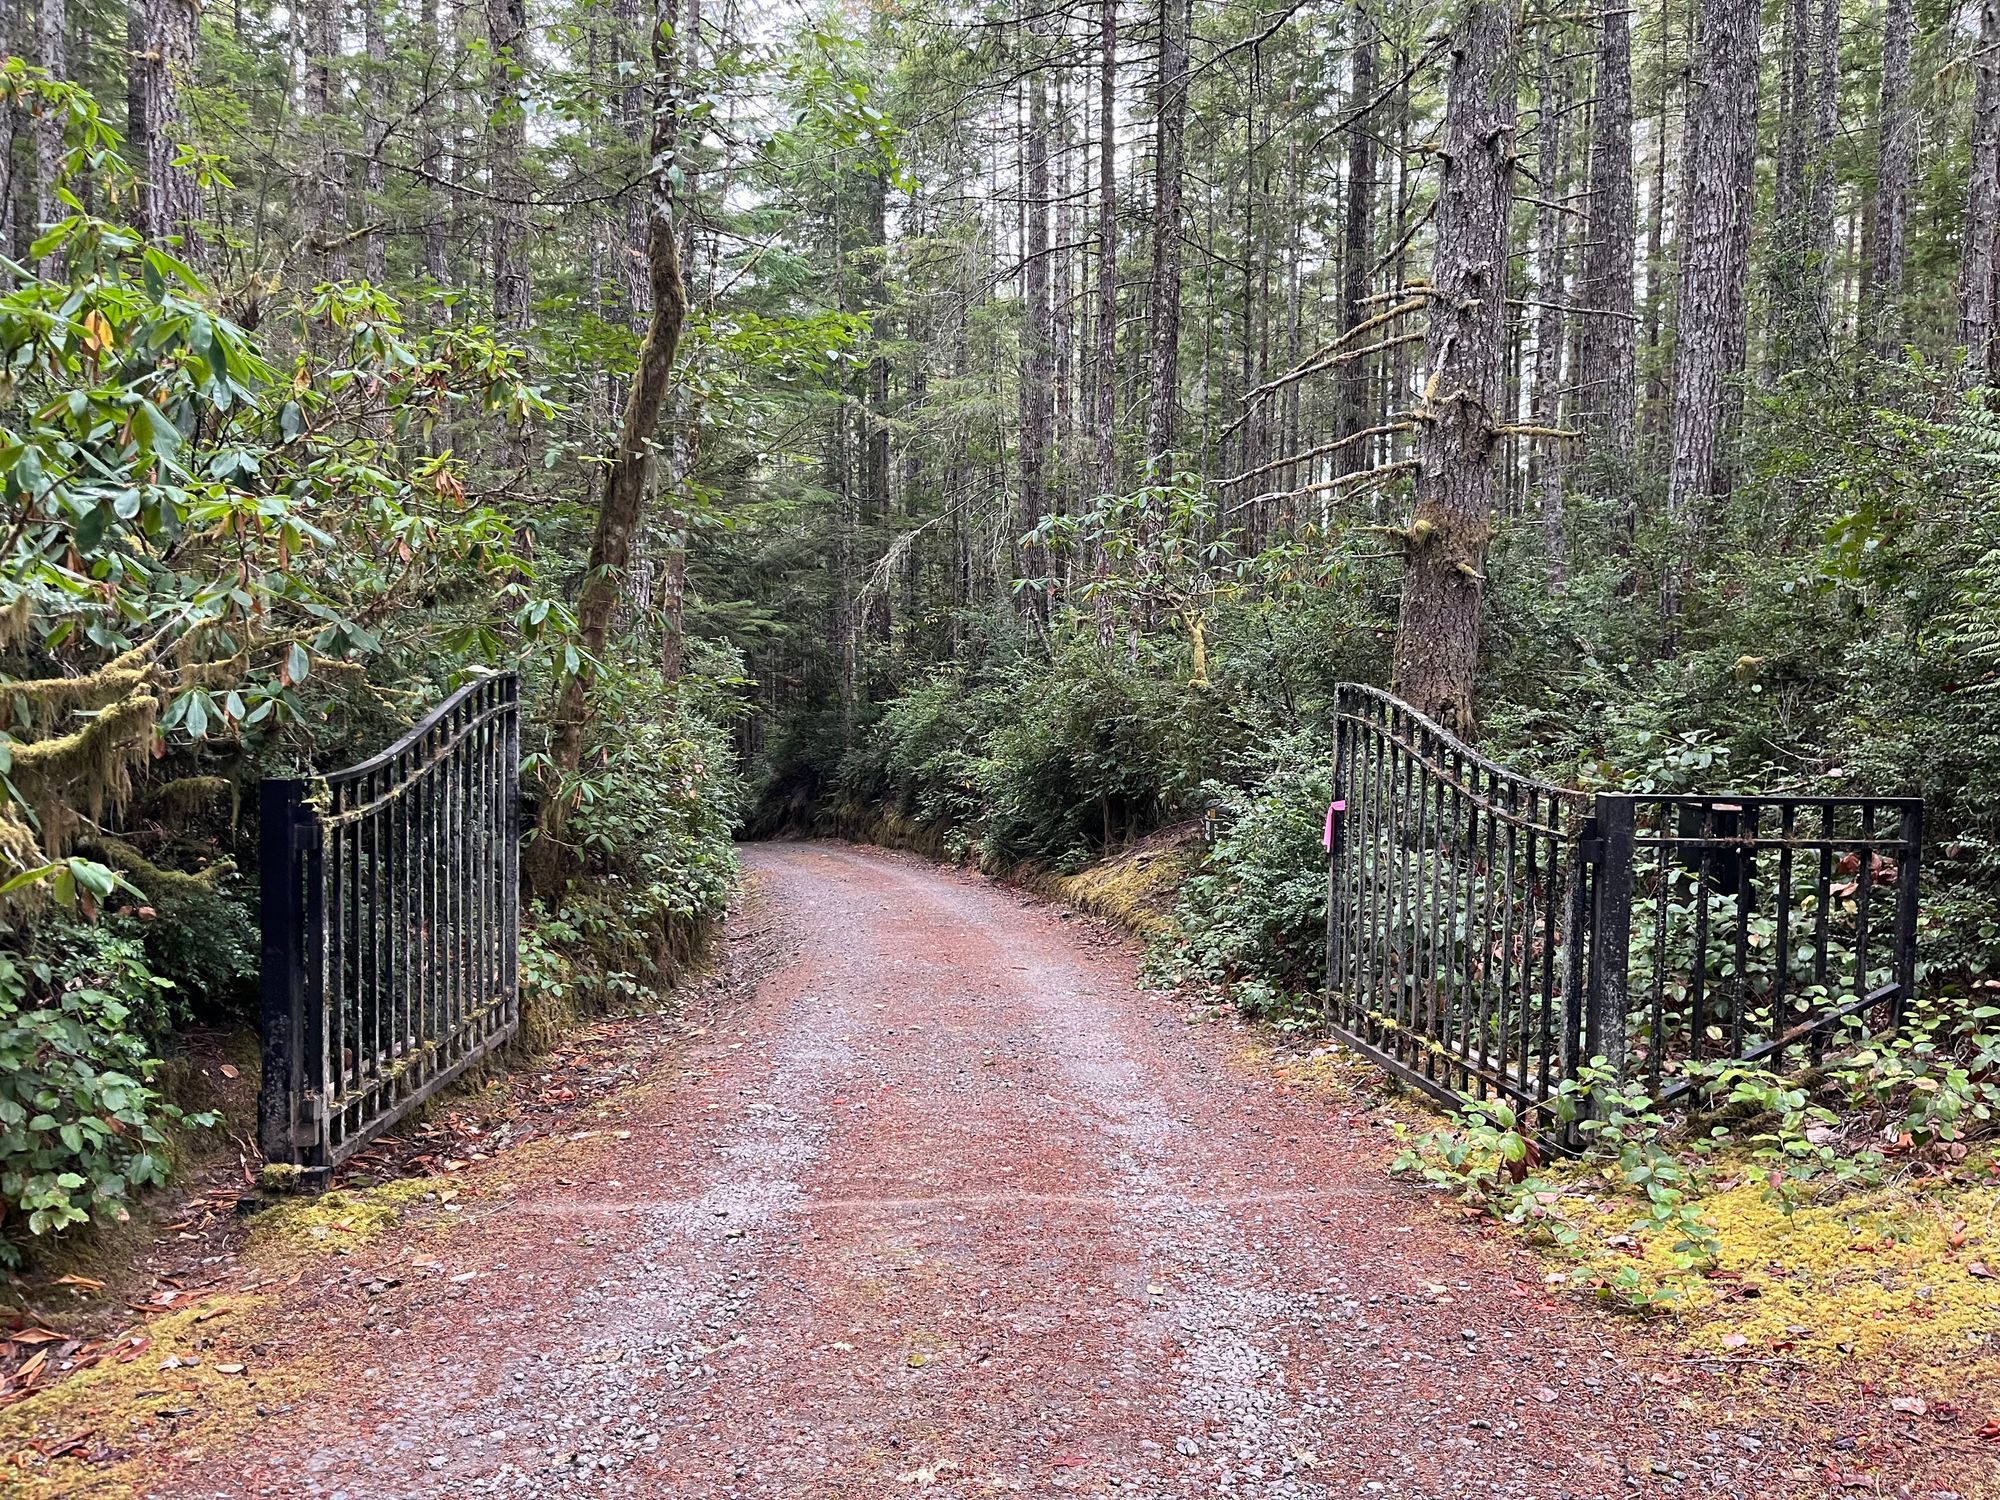 An iron gate is open on both sides of a gravel road heading down into a thick forest.